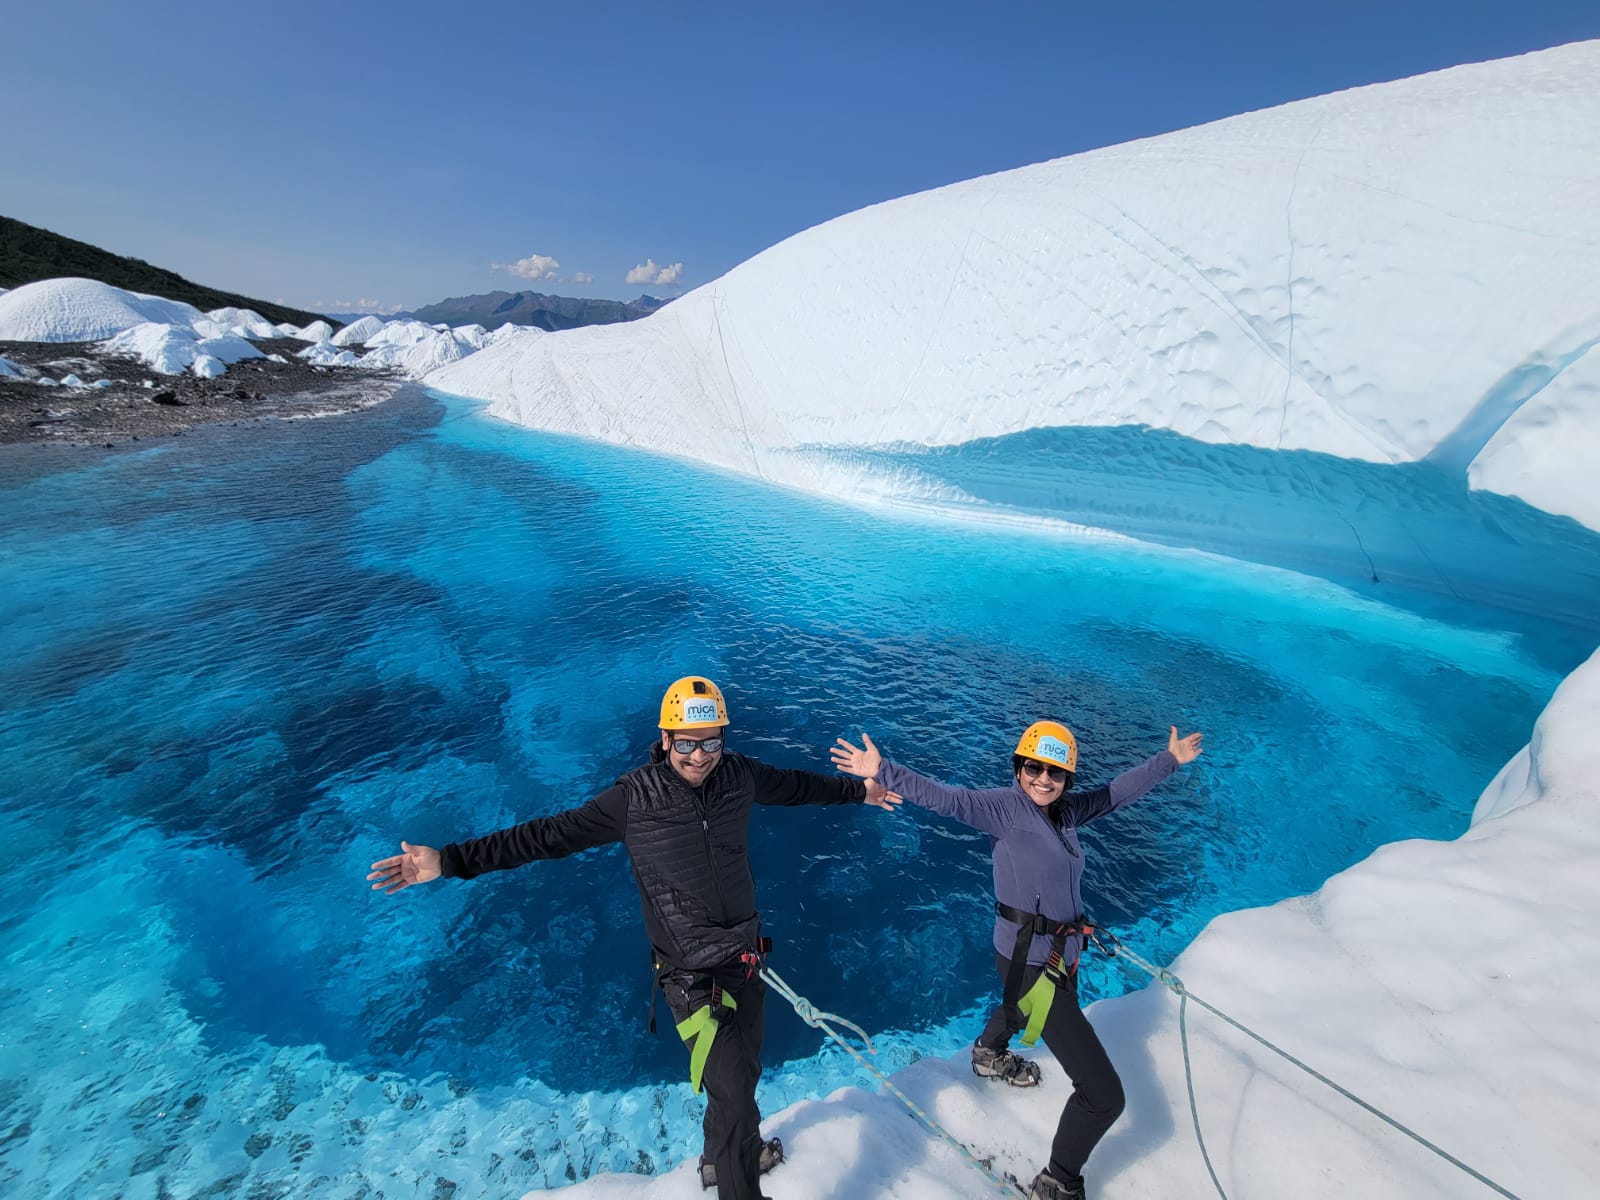 Explorers on ropes over blue glacial lake